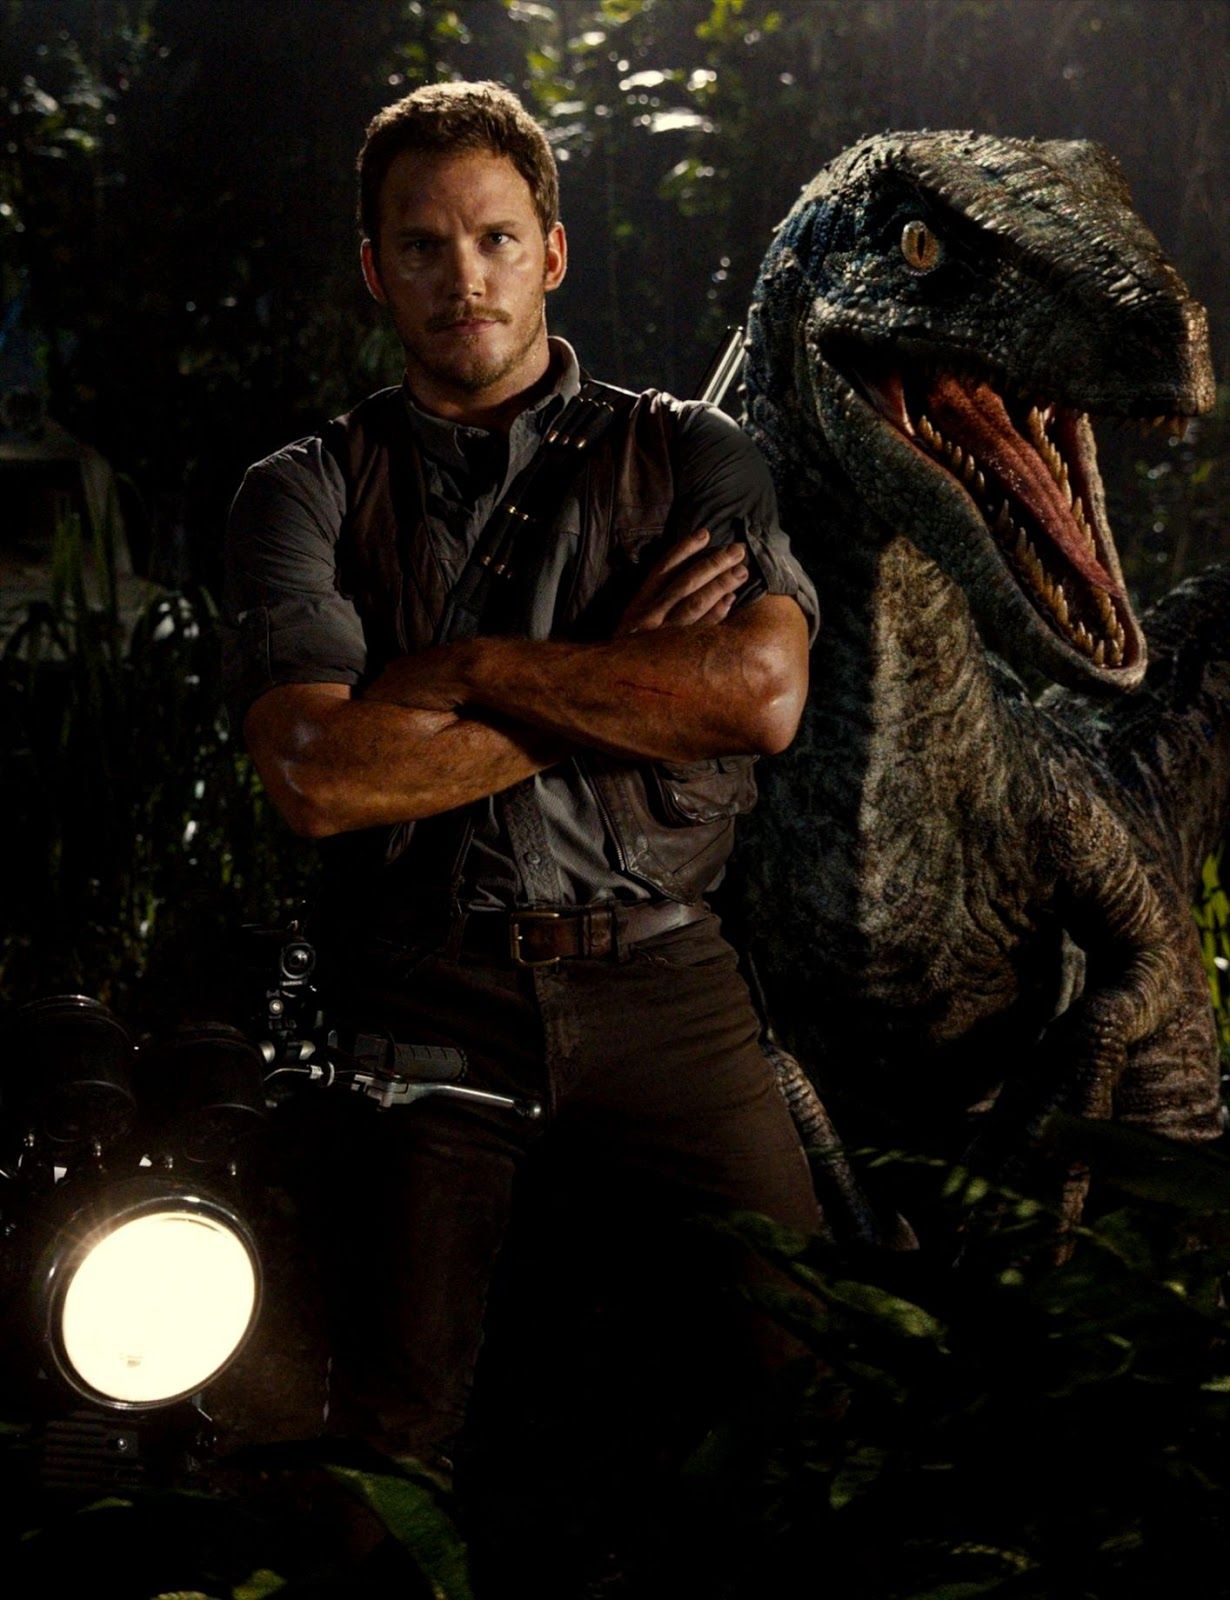 Blue Jurassic World Wallpaper, Share Or Upload Your Own One! Mcx Gold Silver Stock Tips